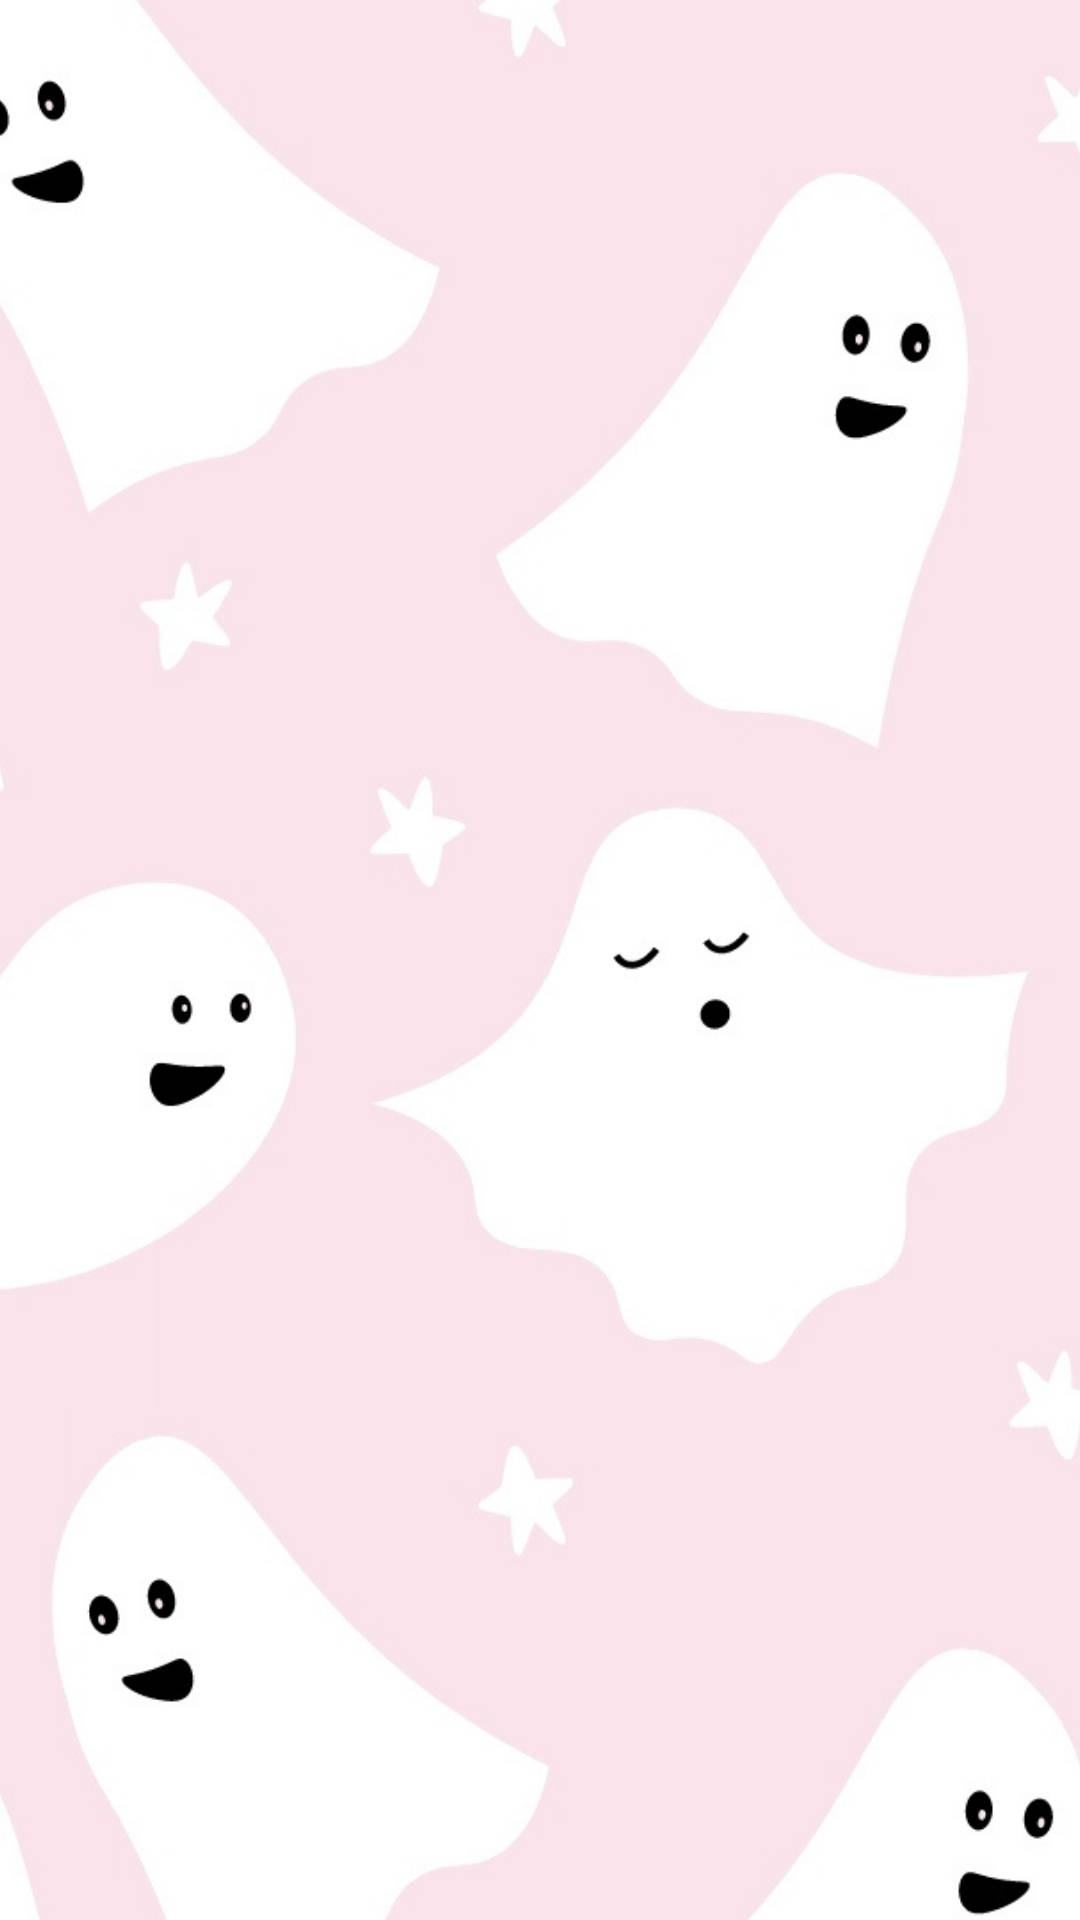 Trick or Treat! Enjoy the Halloween fun with this cute phone! Wallpaper